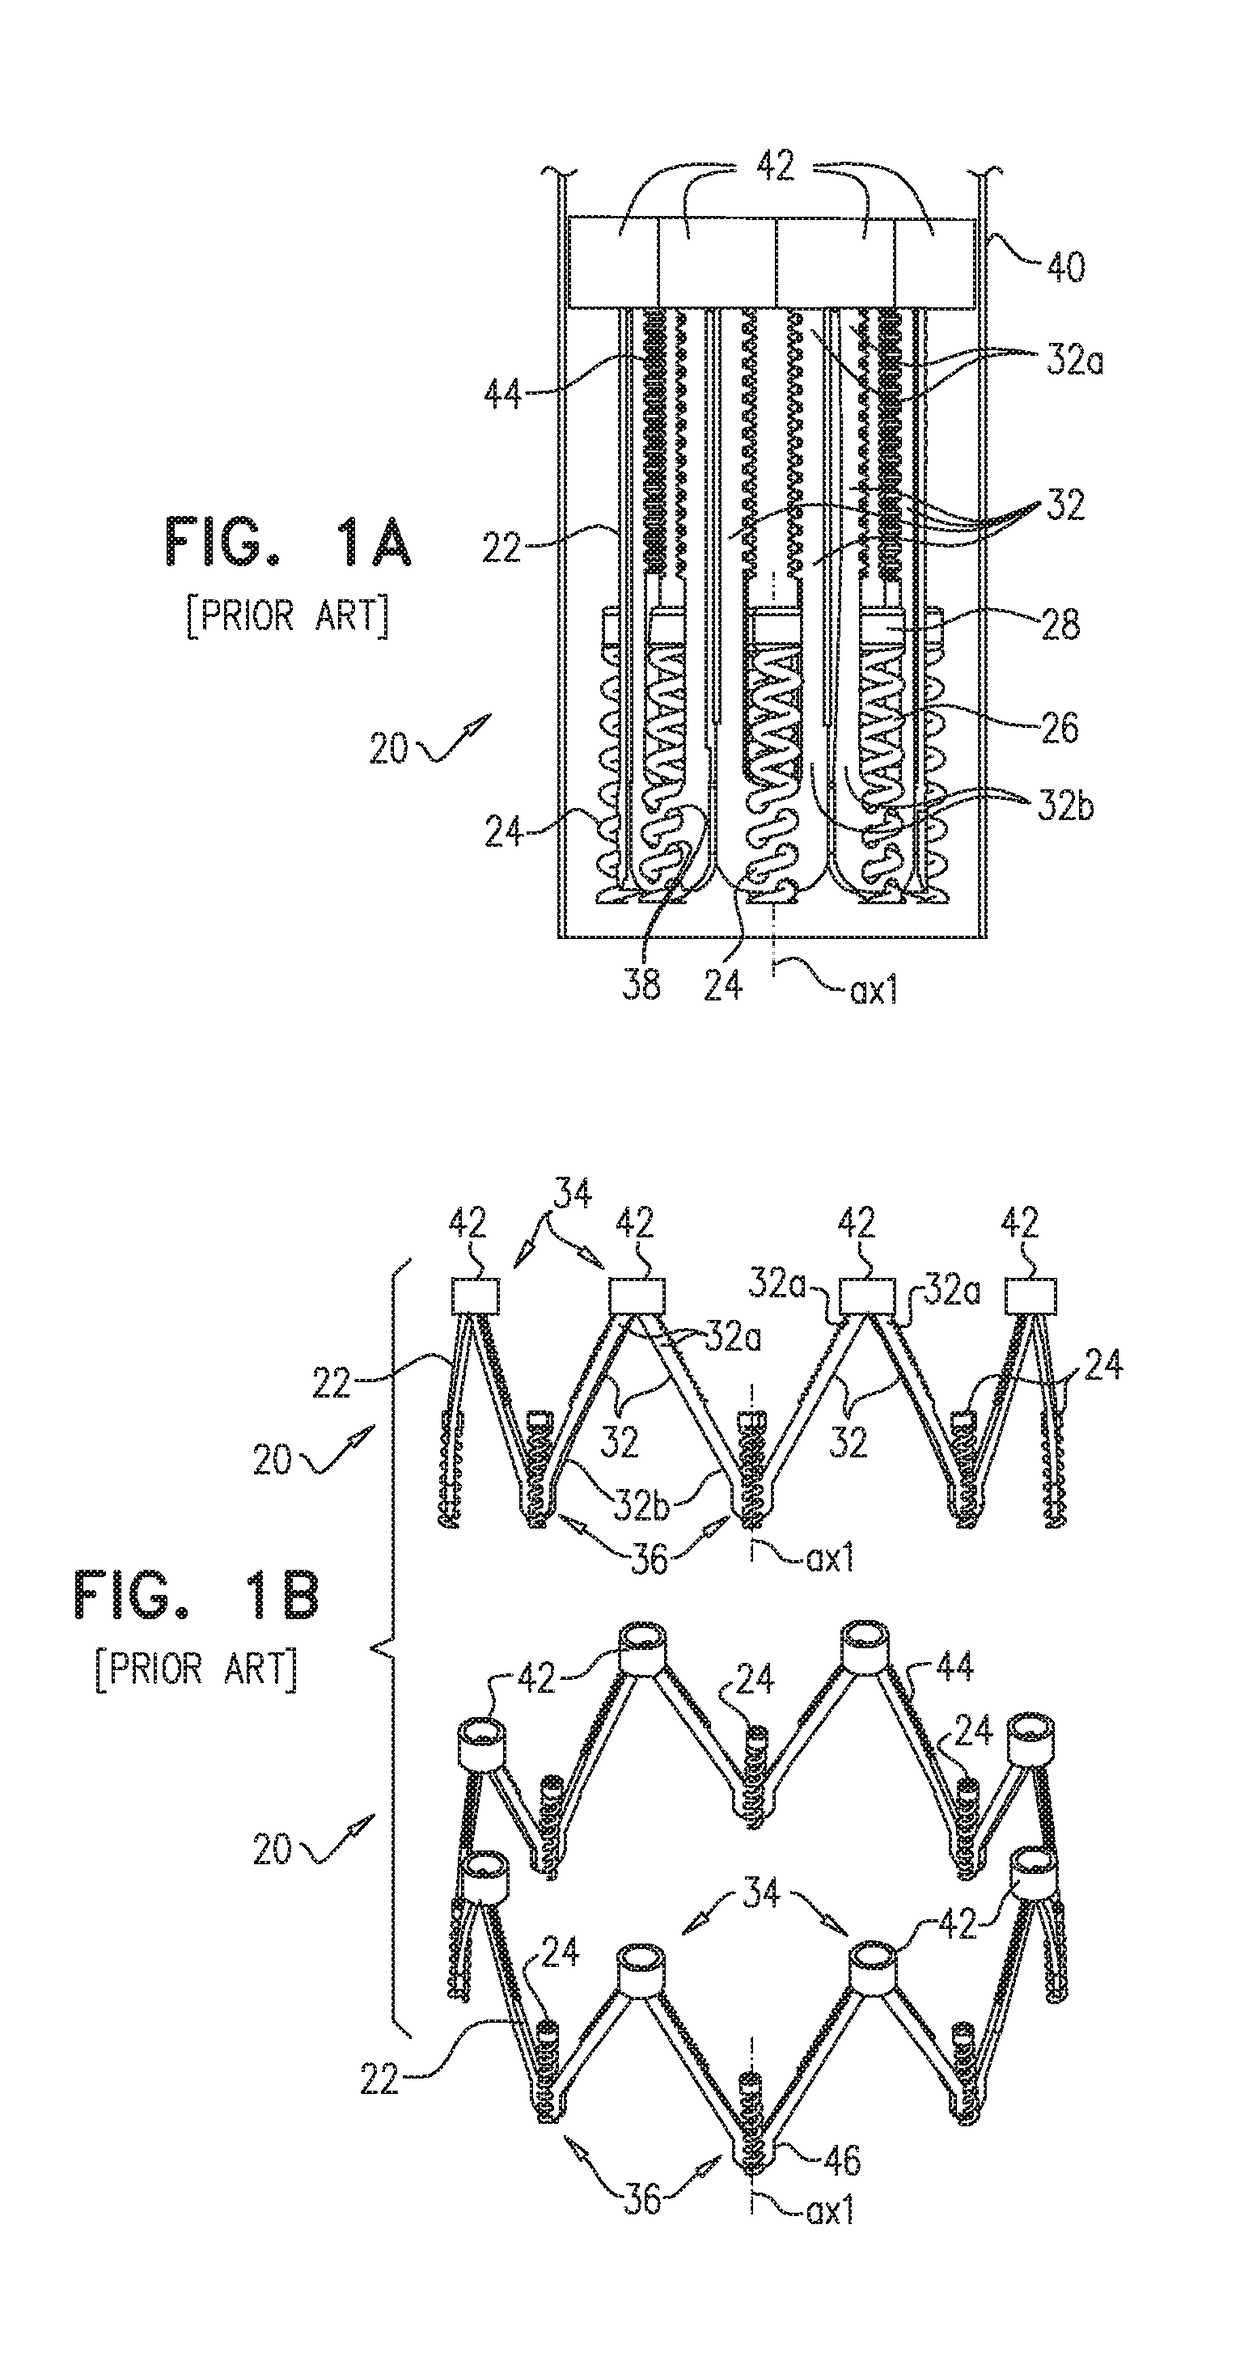 Adjustable annuloplasty device with alternating peaks and troughs